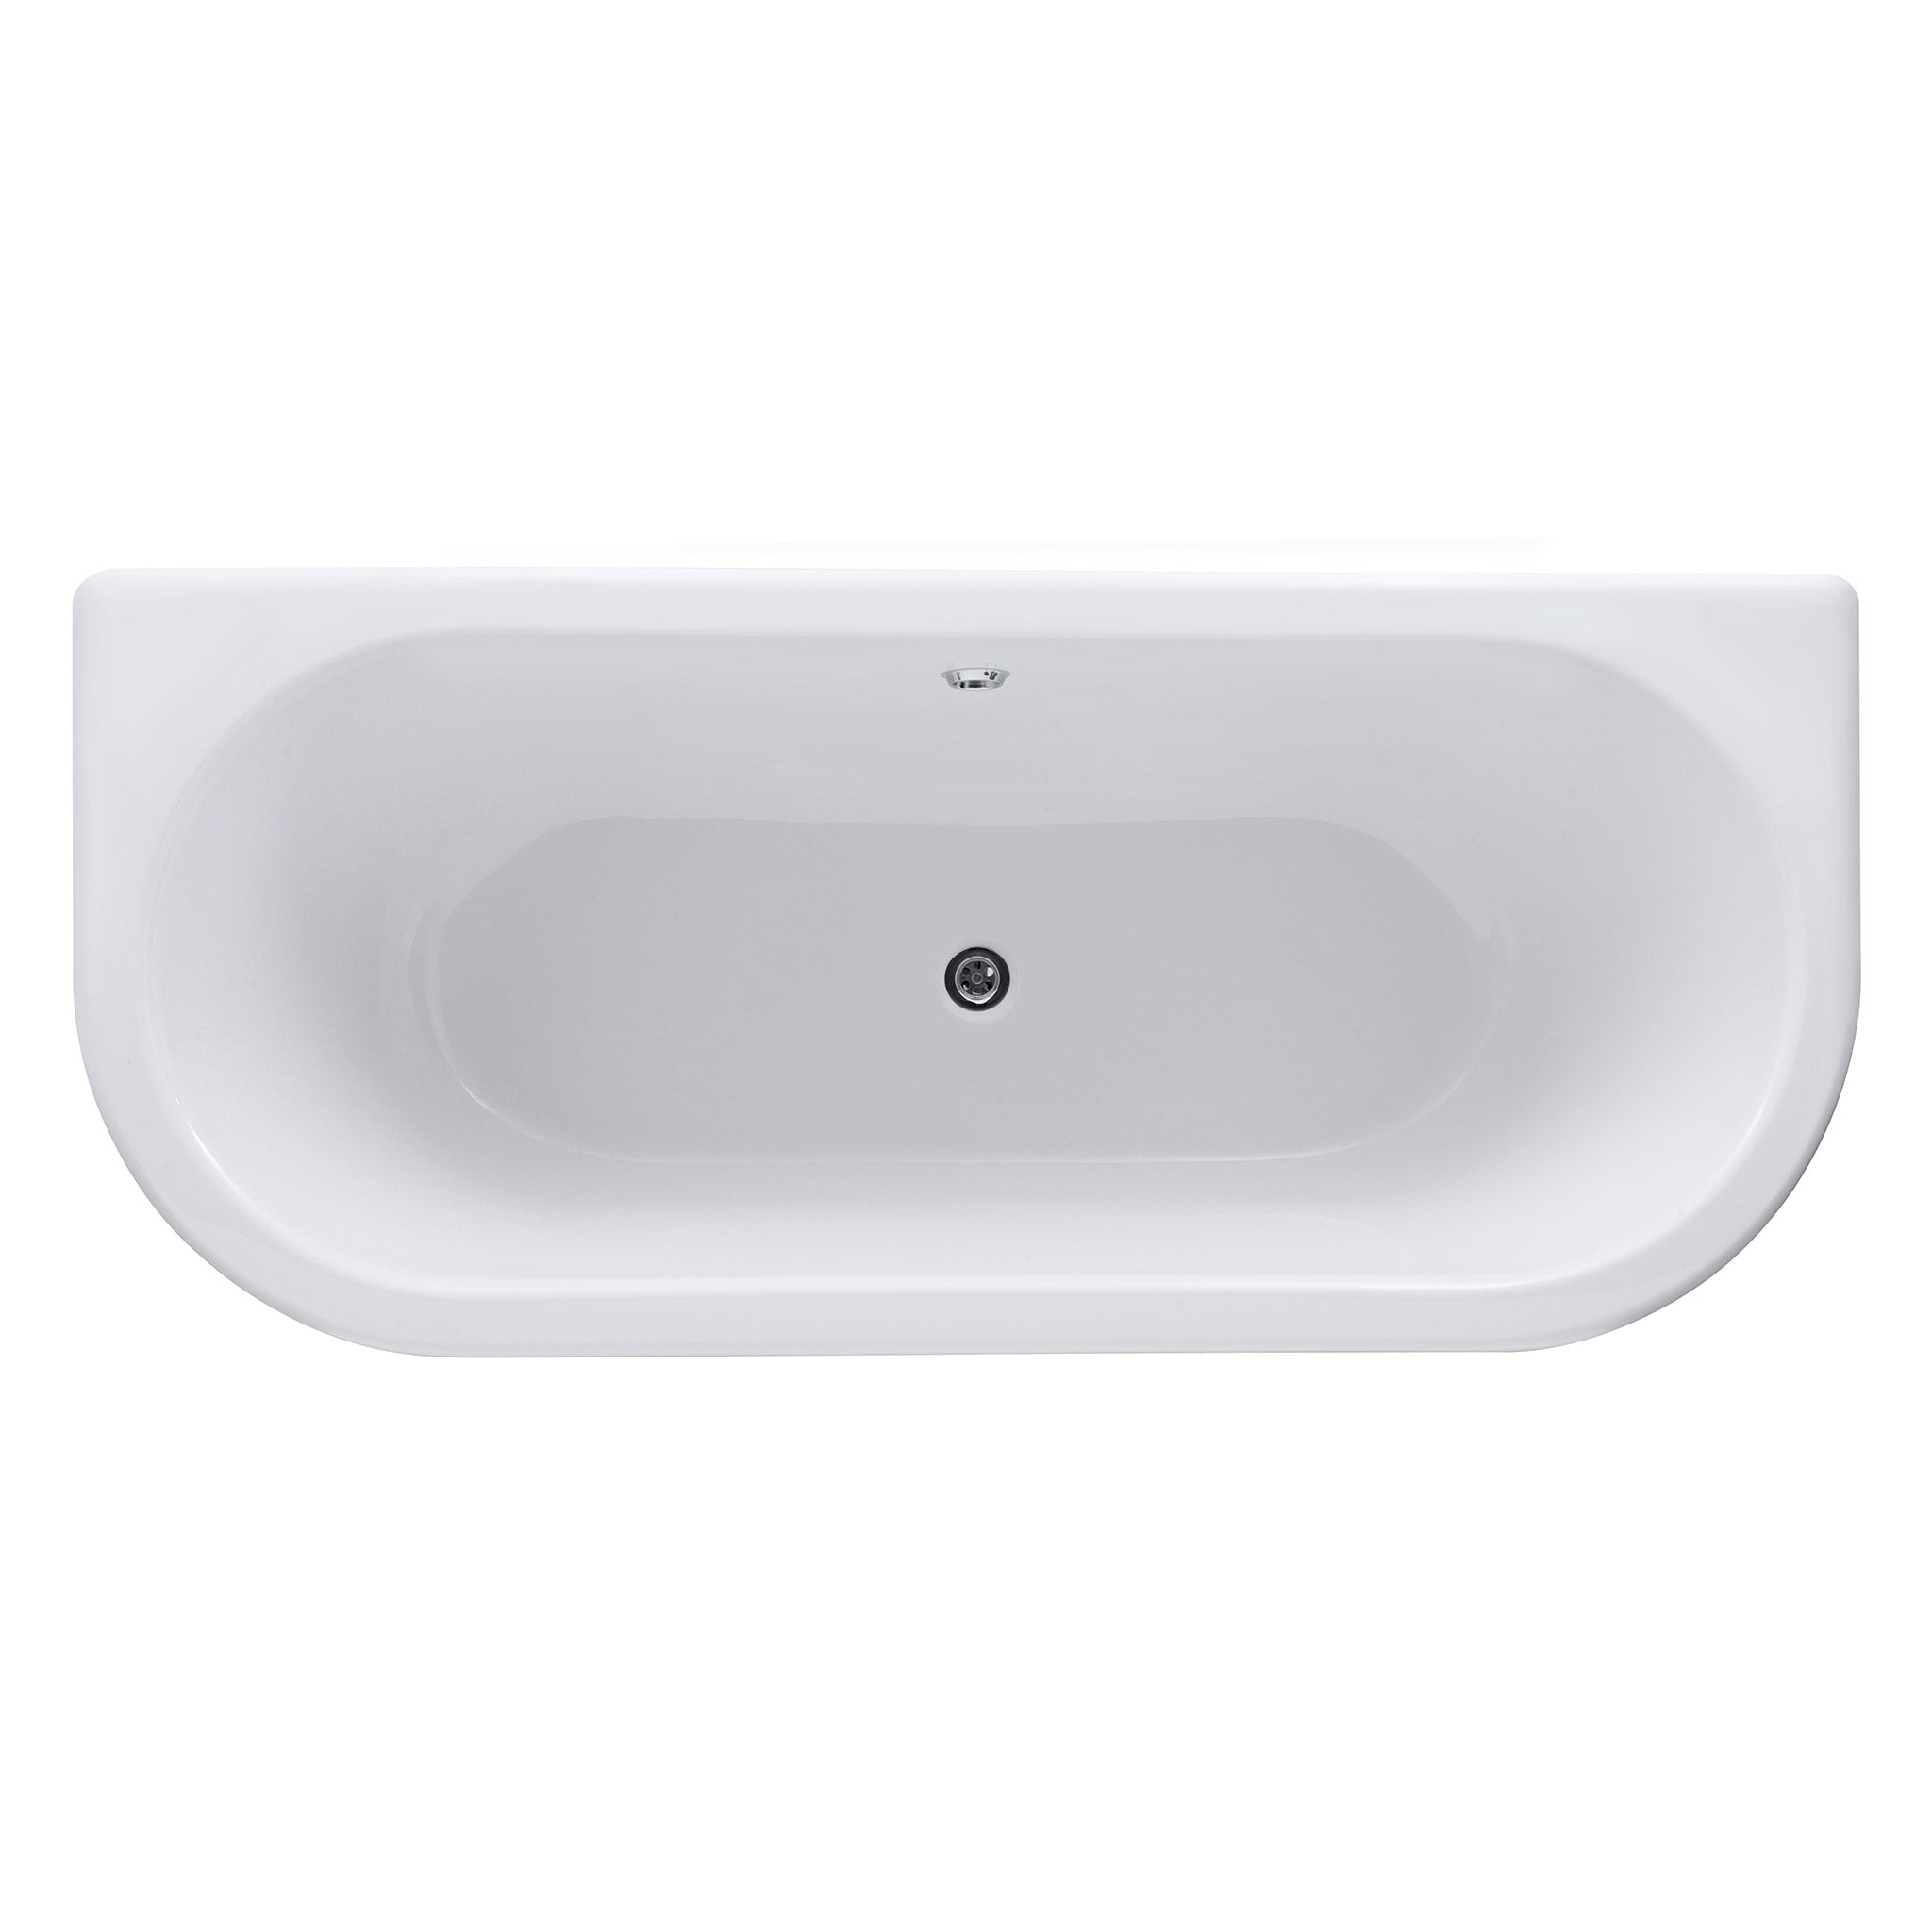 Bayswater Courtnell Back To Wall Freestanding Bath 1700 x 750mm